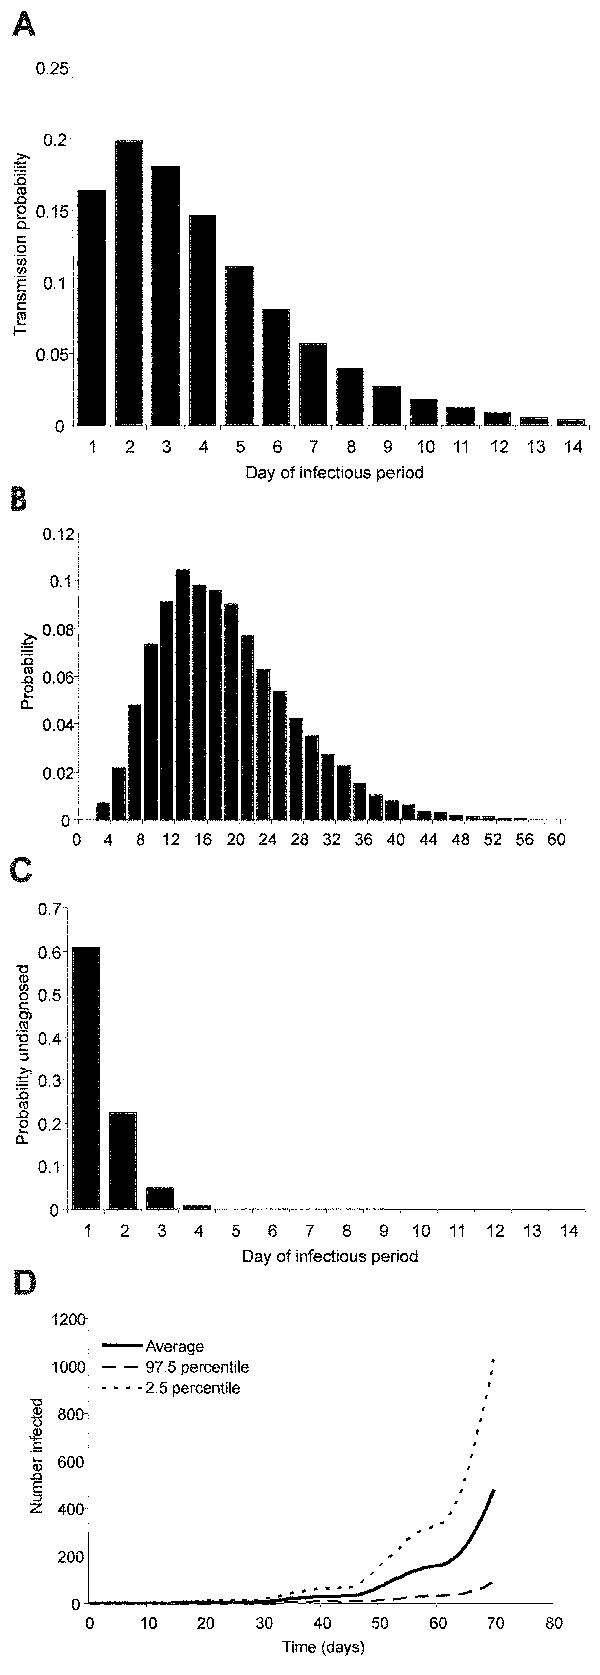 A, the transmission probability per contact by day of the infectious period; B, the probability distribution of the number of contacts with susceptible persons per day; C, the probability of remaining undiagnosed but infectious case by day of the infectious period; and D, the mean (solid line) and the 2.5% and 97.5% percentiles (dotted lines) of the number of infected persons for 500 simulation runs for an epidemic without any intervention after the introduction of one index case at the beginnin